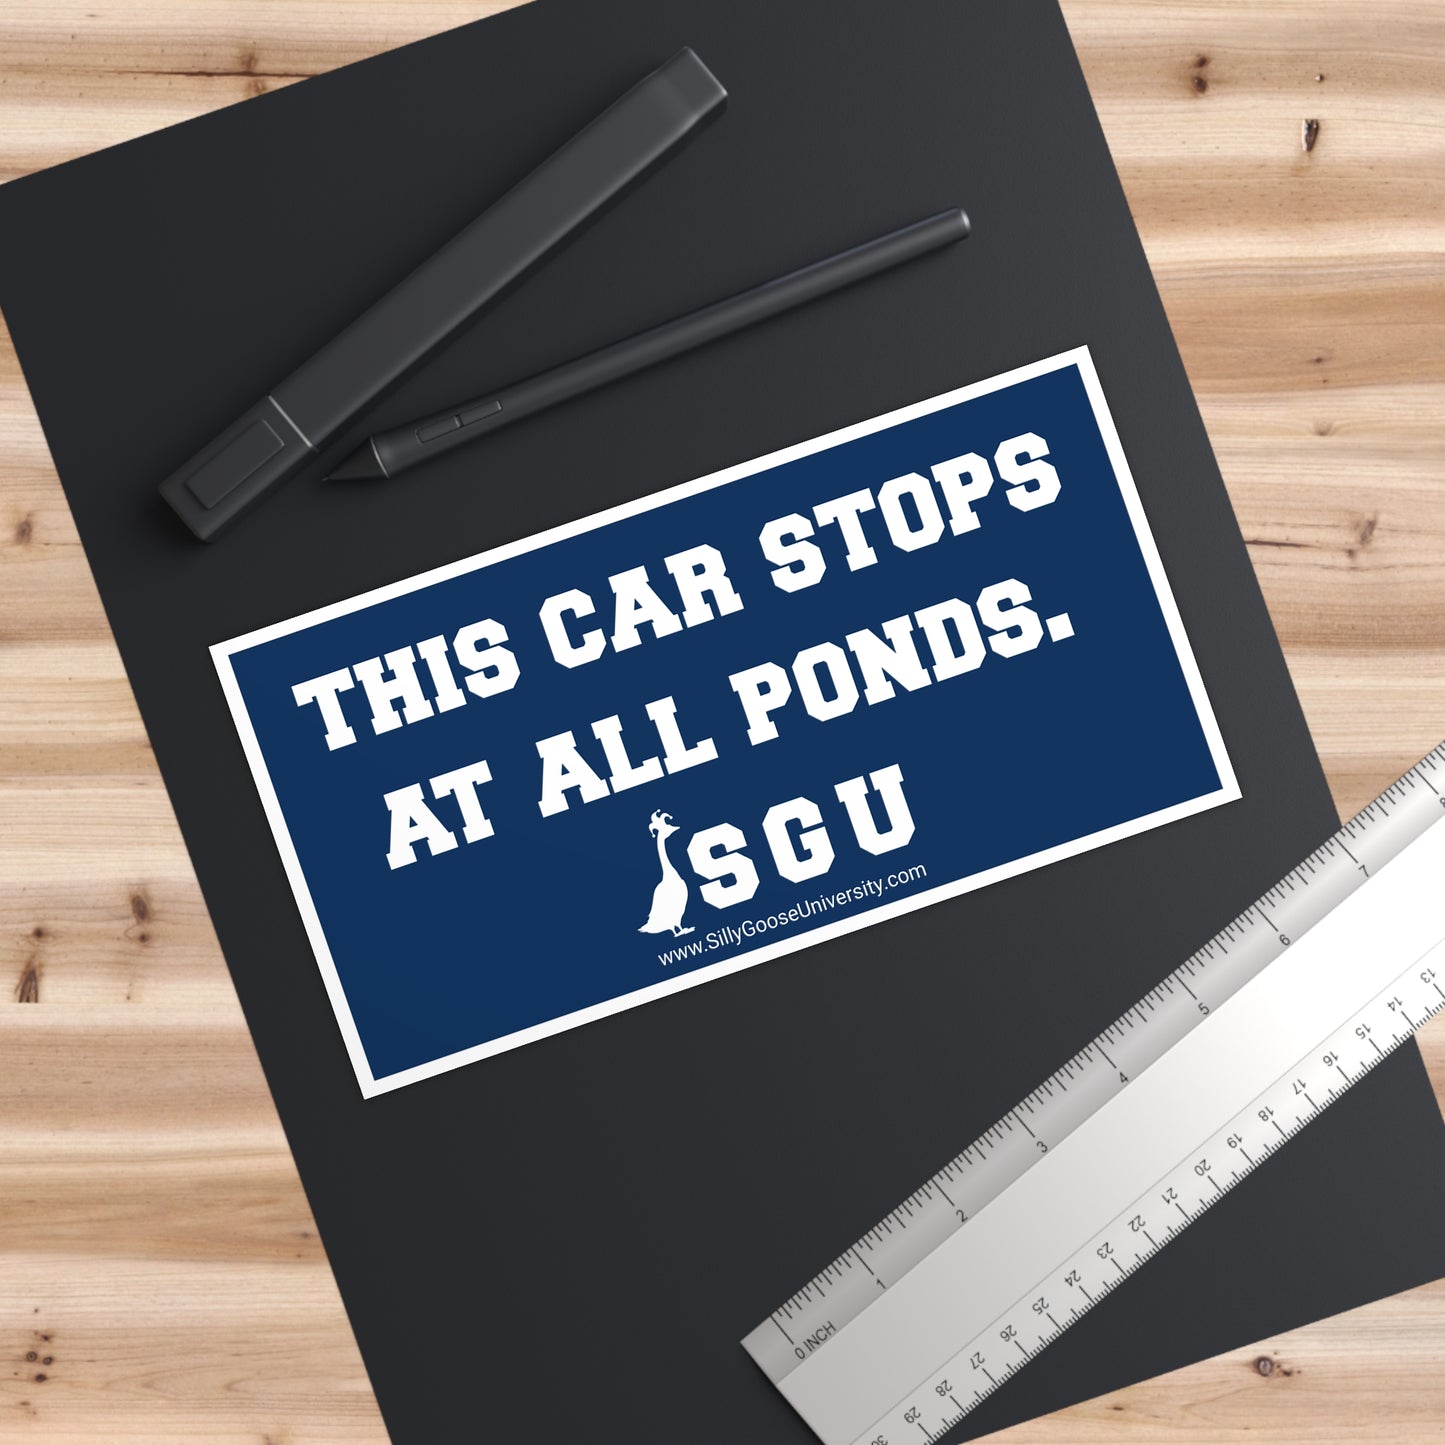 SGU This Car Stops At All Ponds | Bumper Sticker | 7.5" x 3.75"